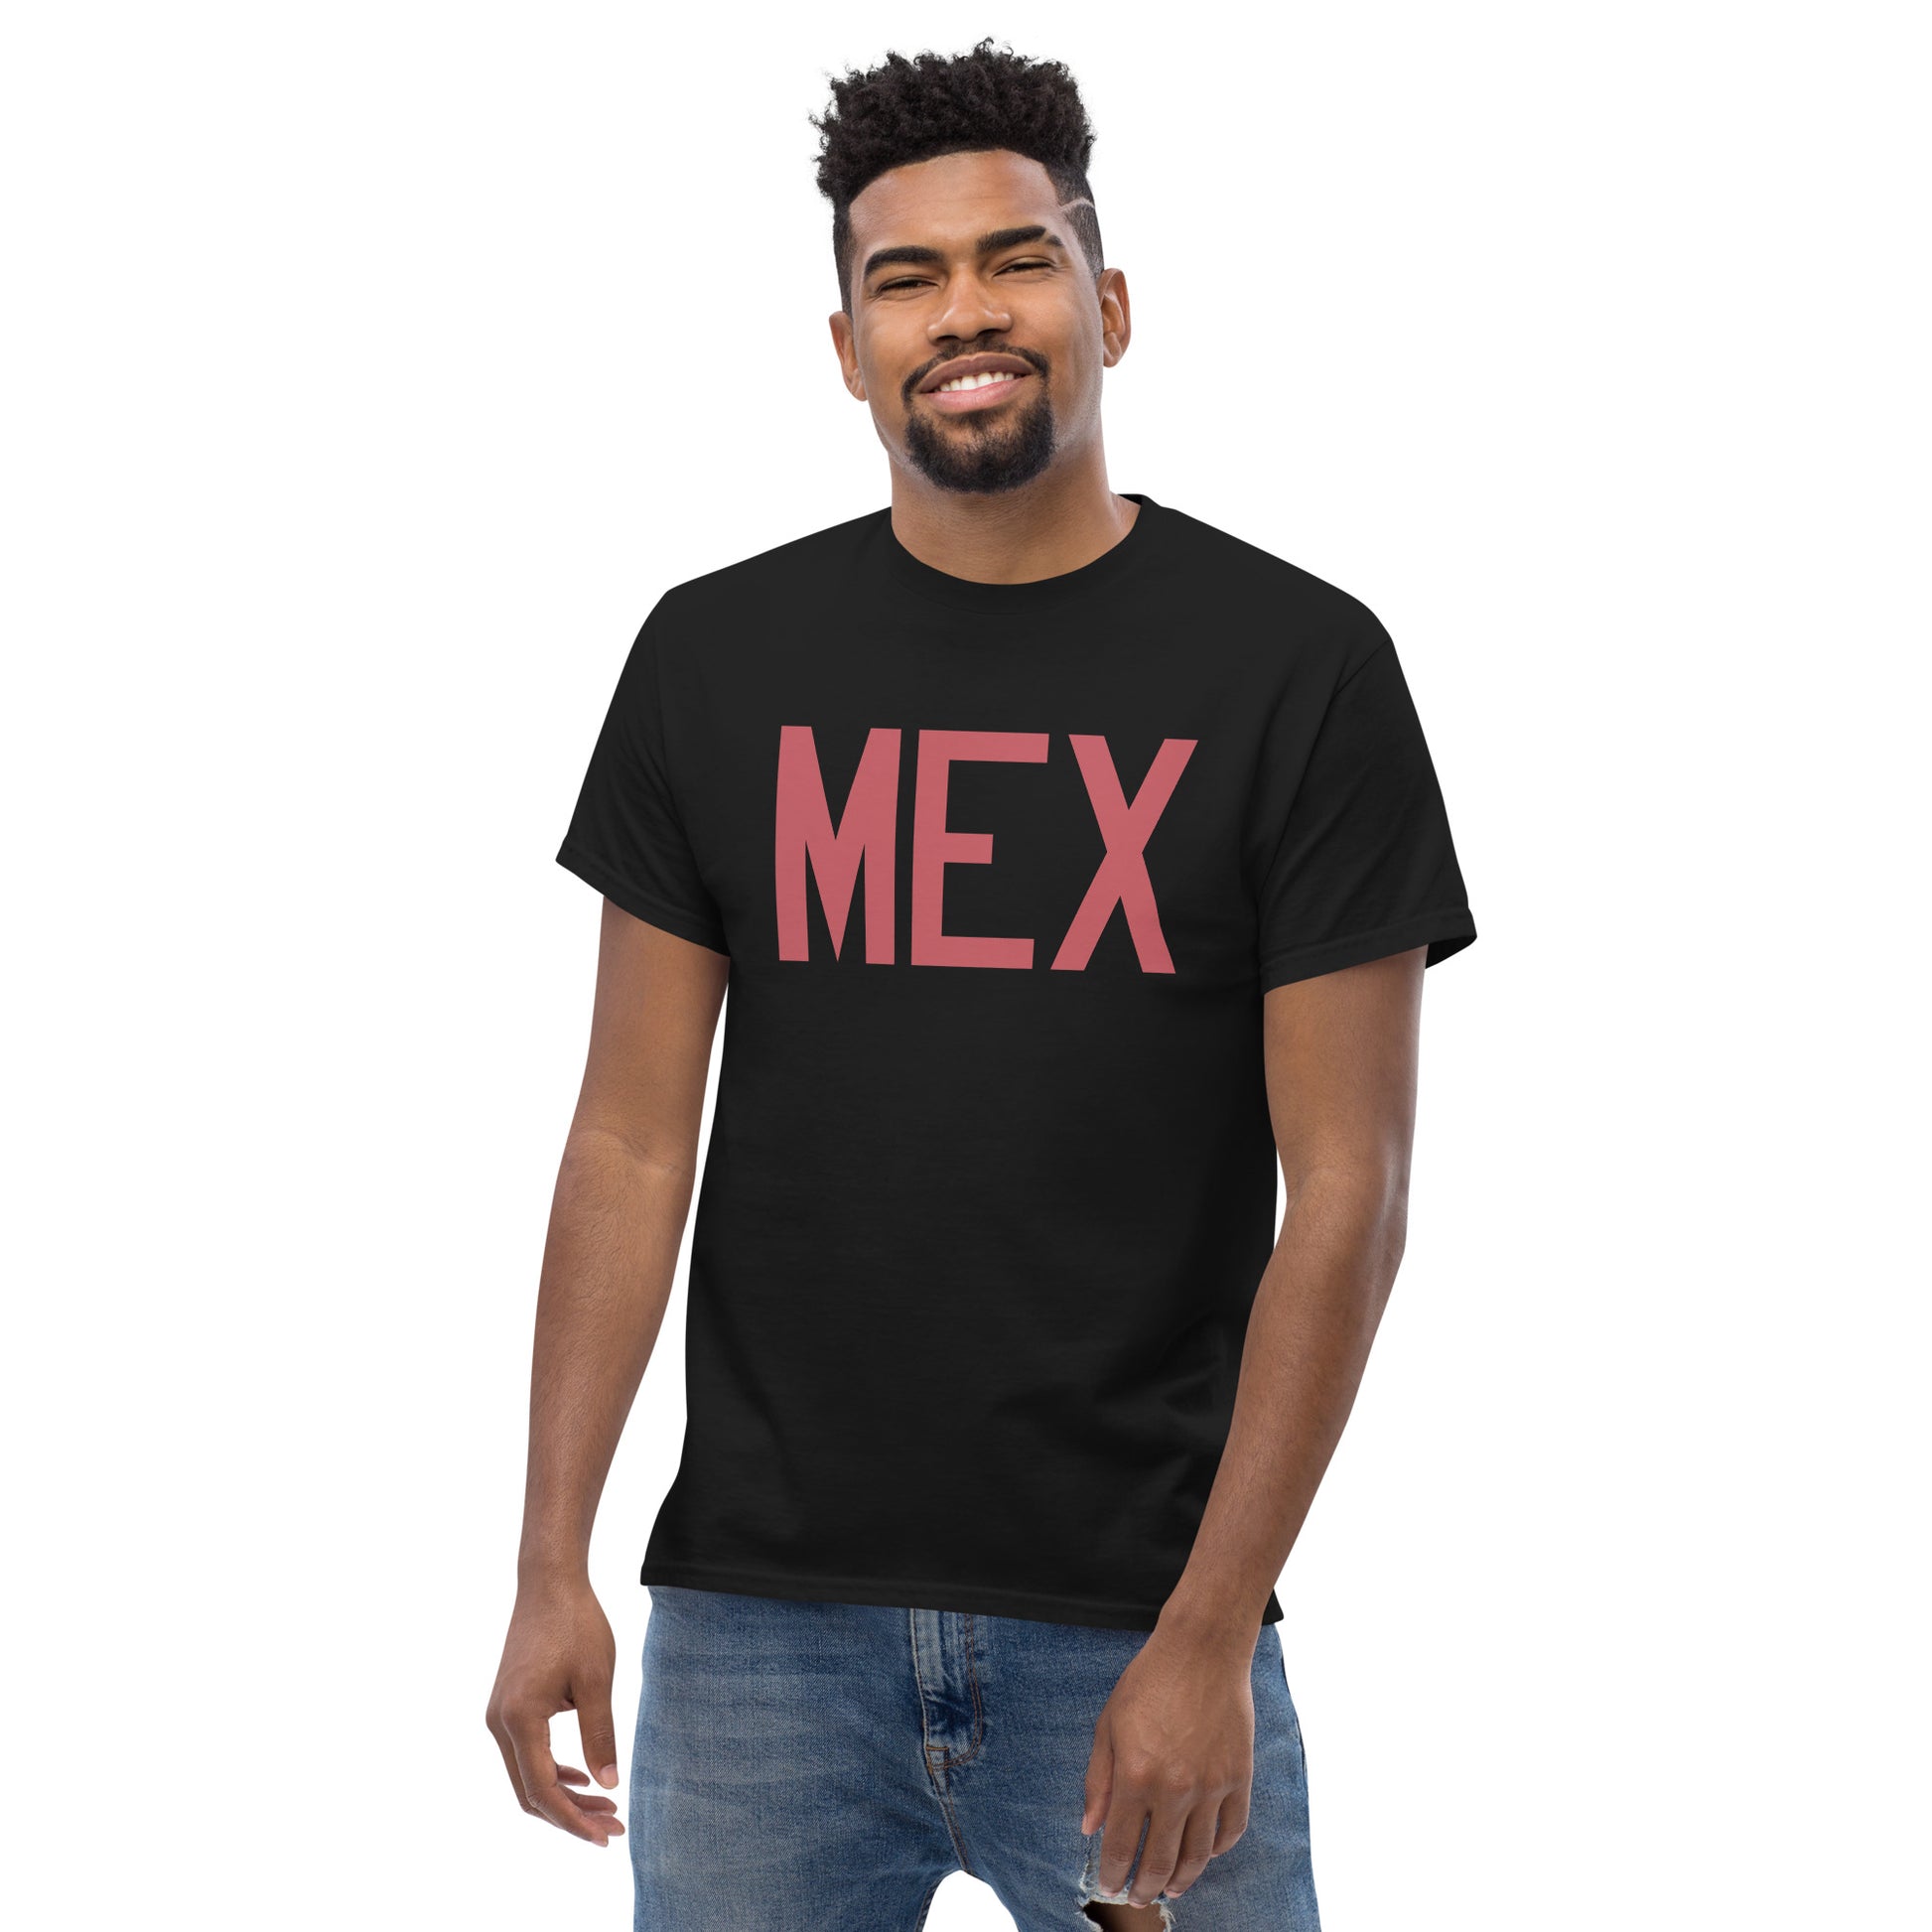 Aviation Enthusiast Men's Tee - Deep Pink Graphic • MEX Mexico City • YHM Designs - Image 06